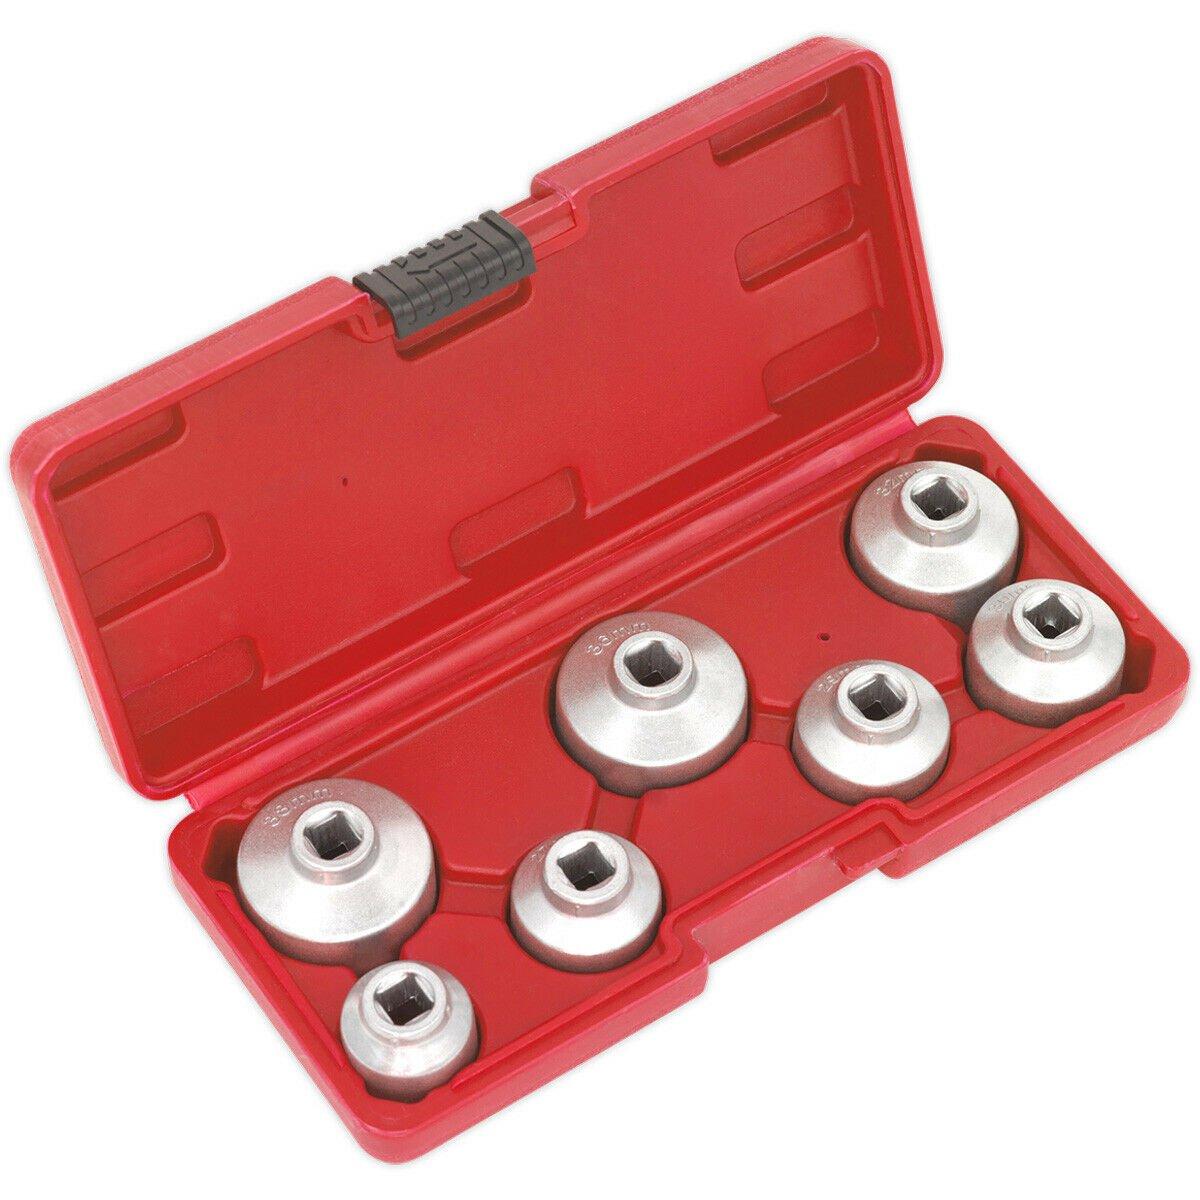 7 Piece Oil Filter Cap Wrench Set - 3/8